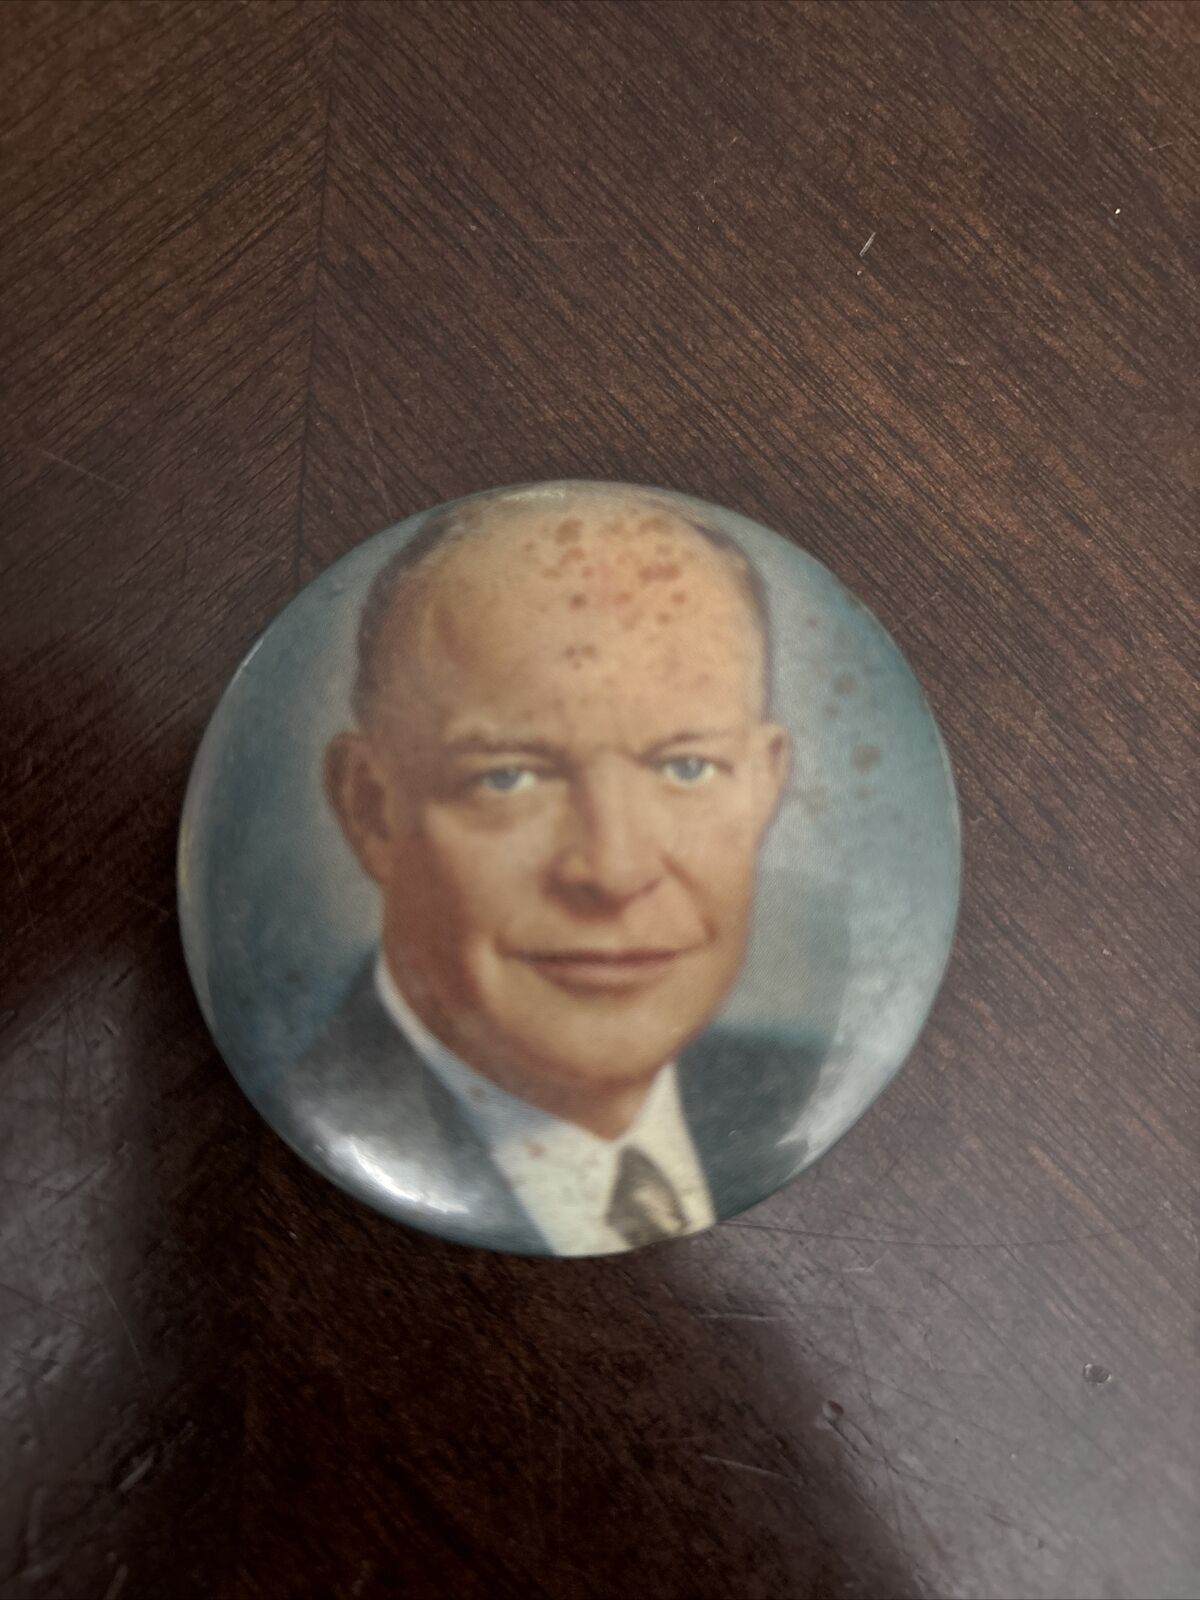 1952 Dwight Eisenhower Presidential Campaign Pin with Artwork Image in a Suit